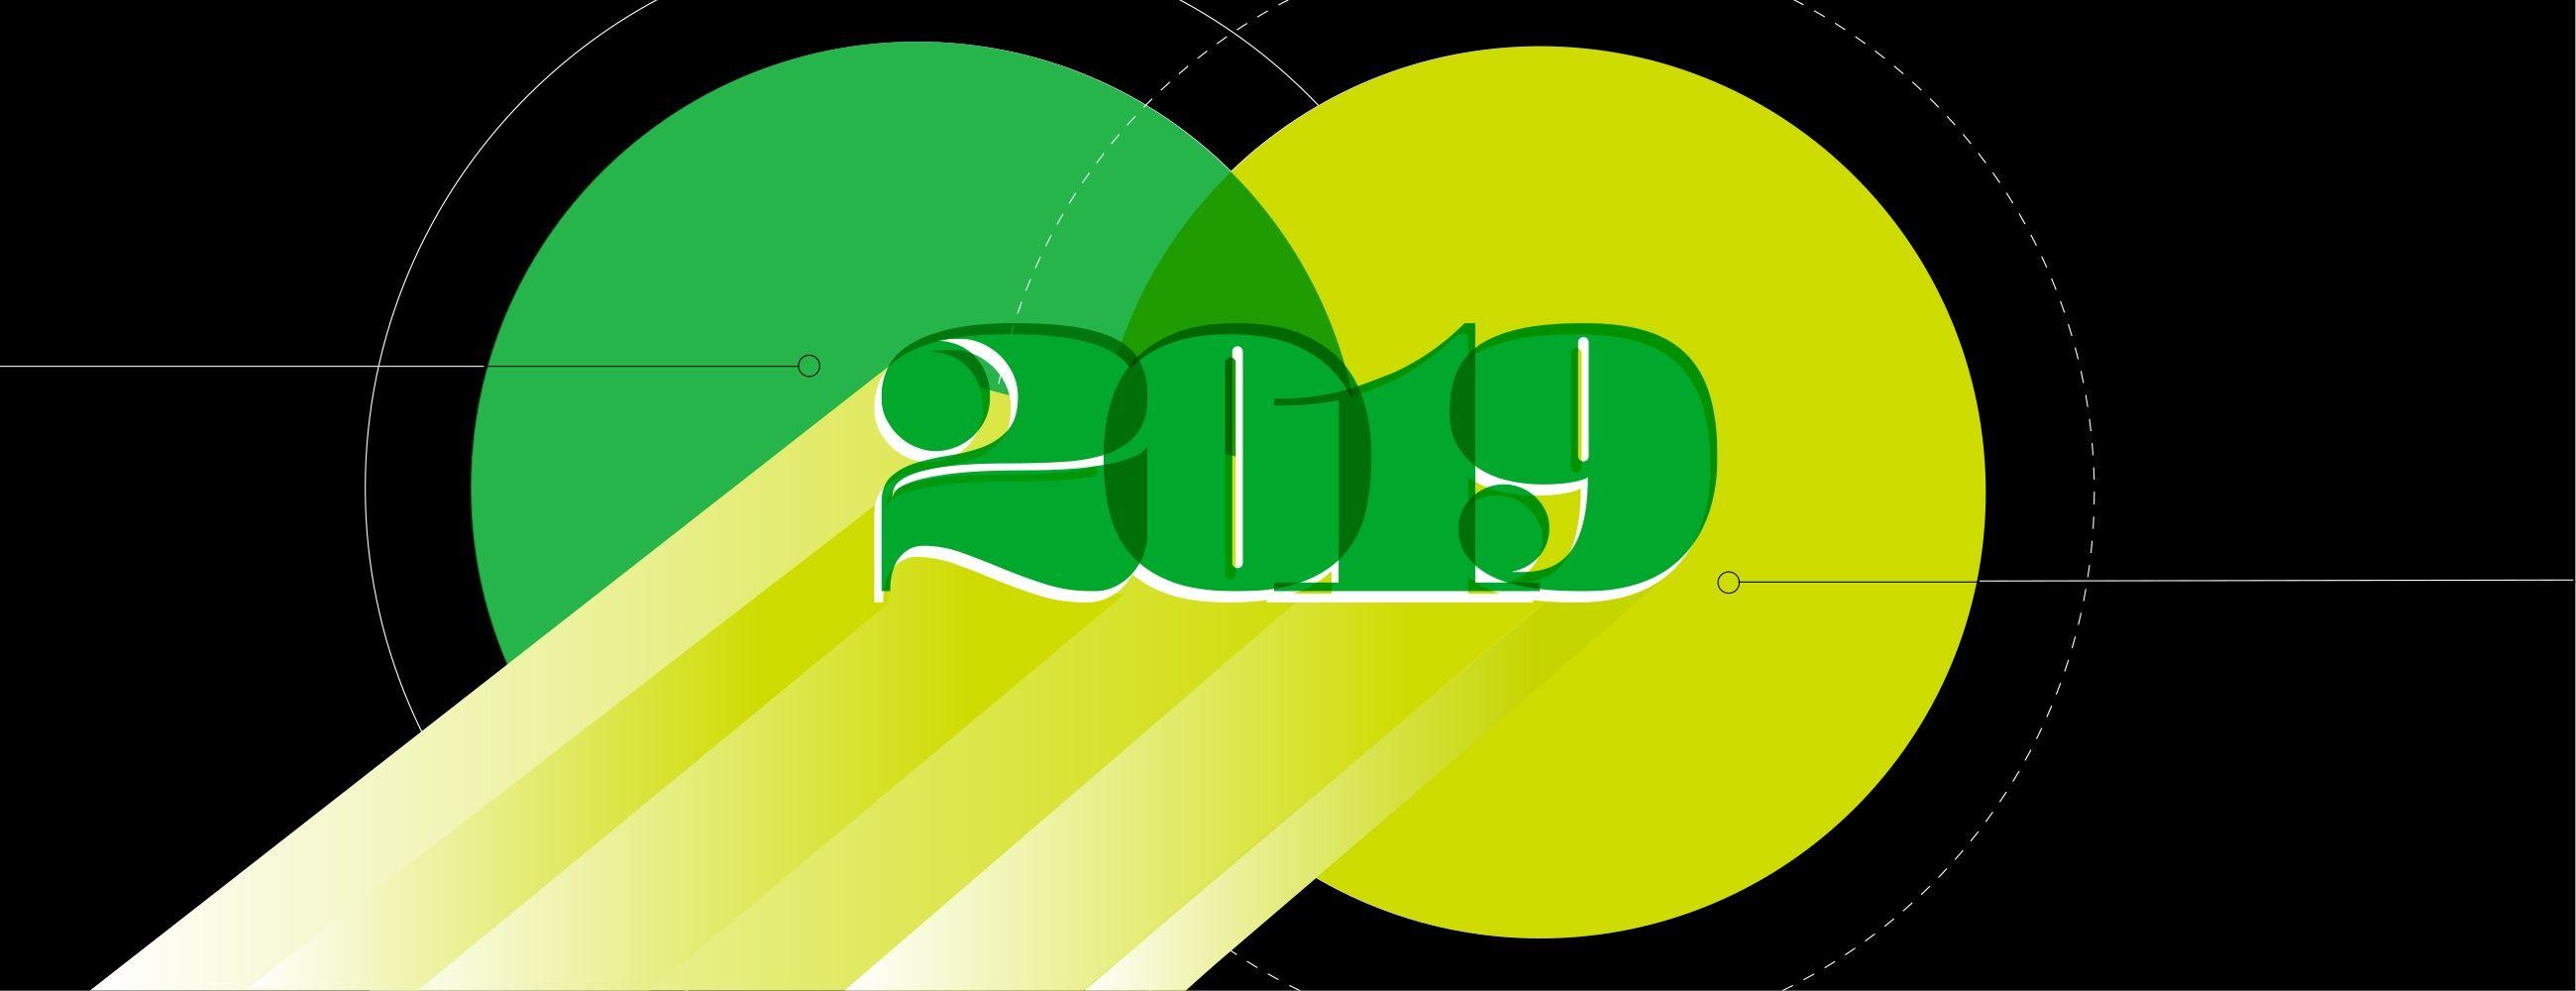 Yellow and Green Circle Logo - Looking Ahead: Evernote's Priorities for 2019